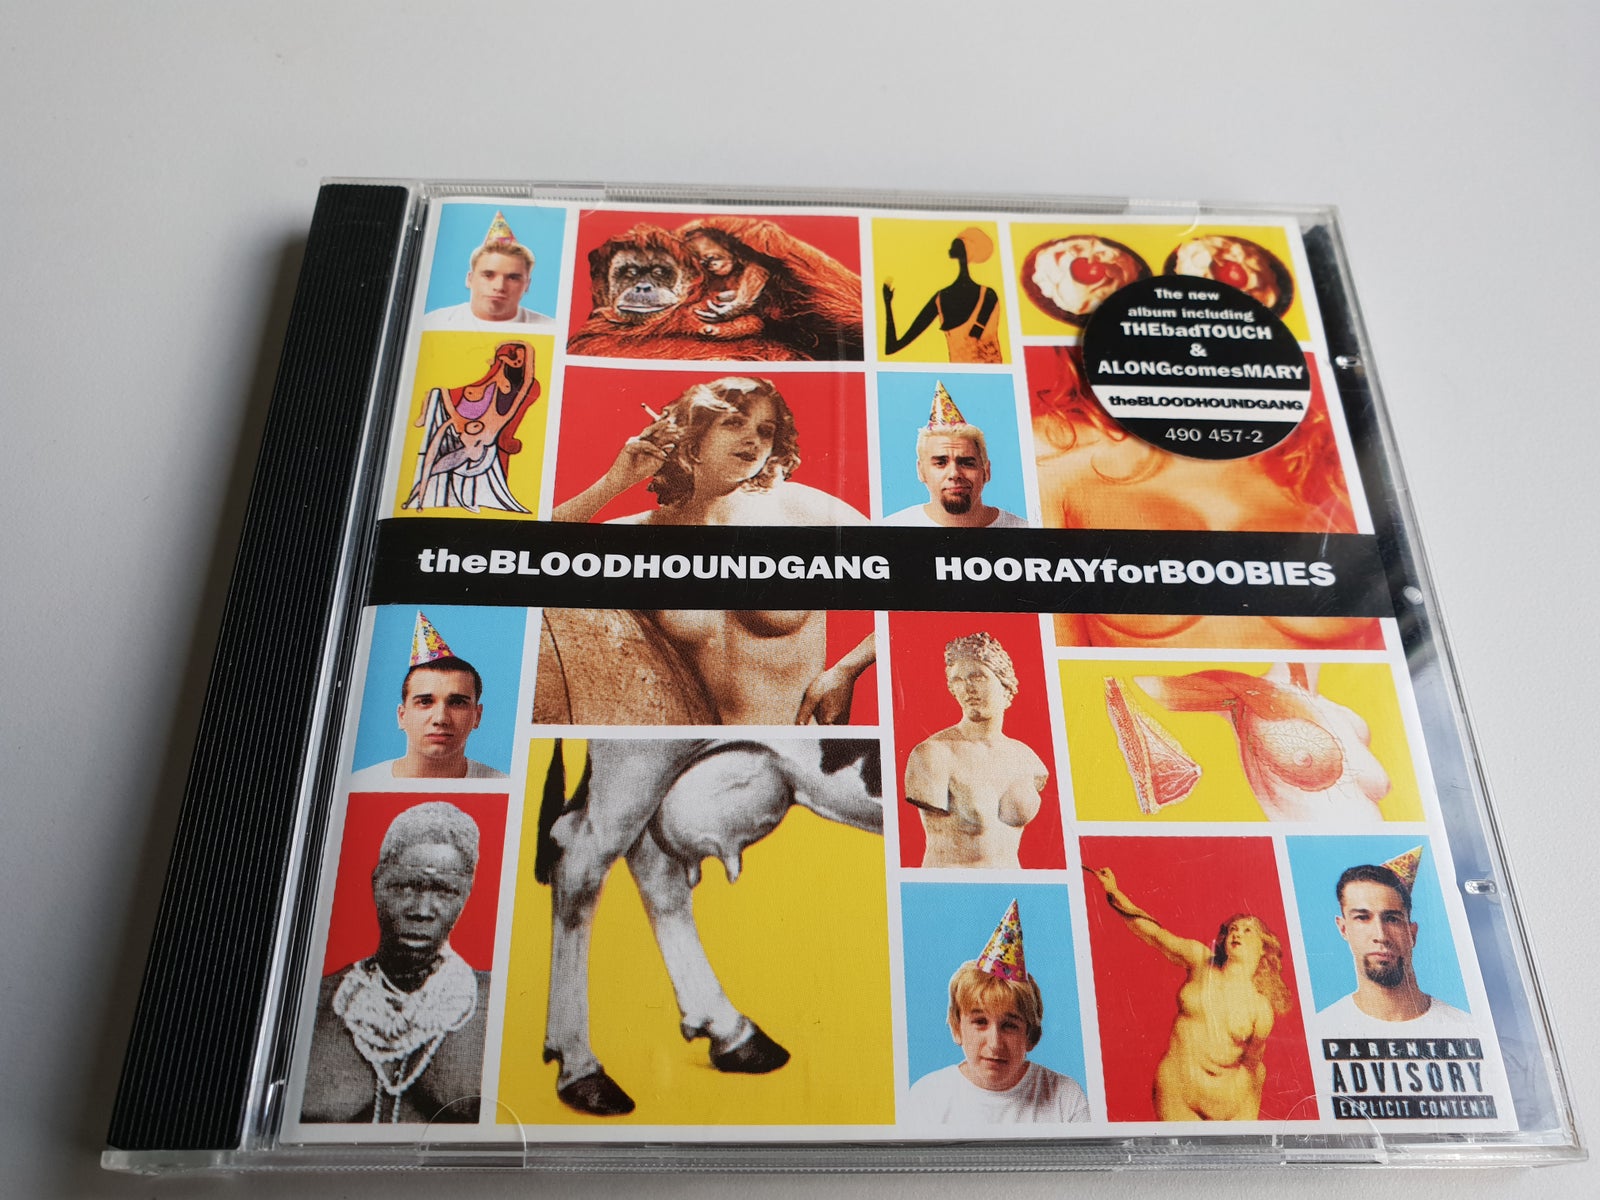 The Bloodhound Gang: HOORAY for BOOBIES, rock